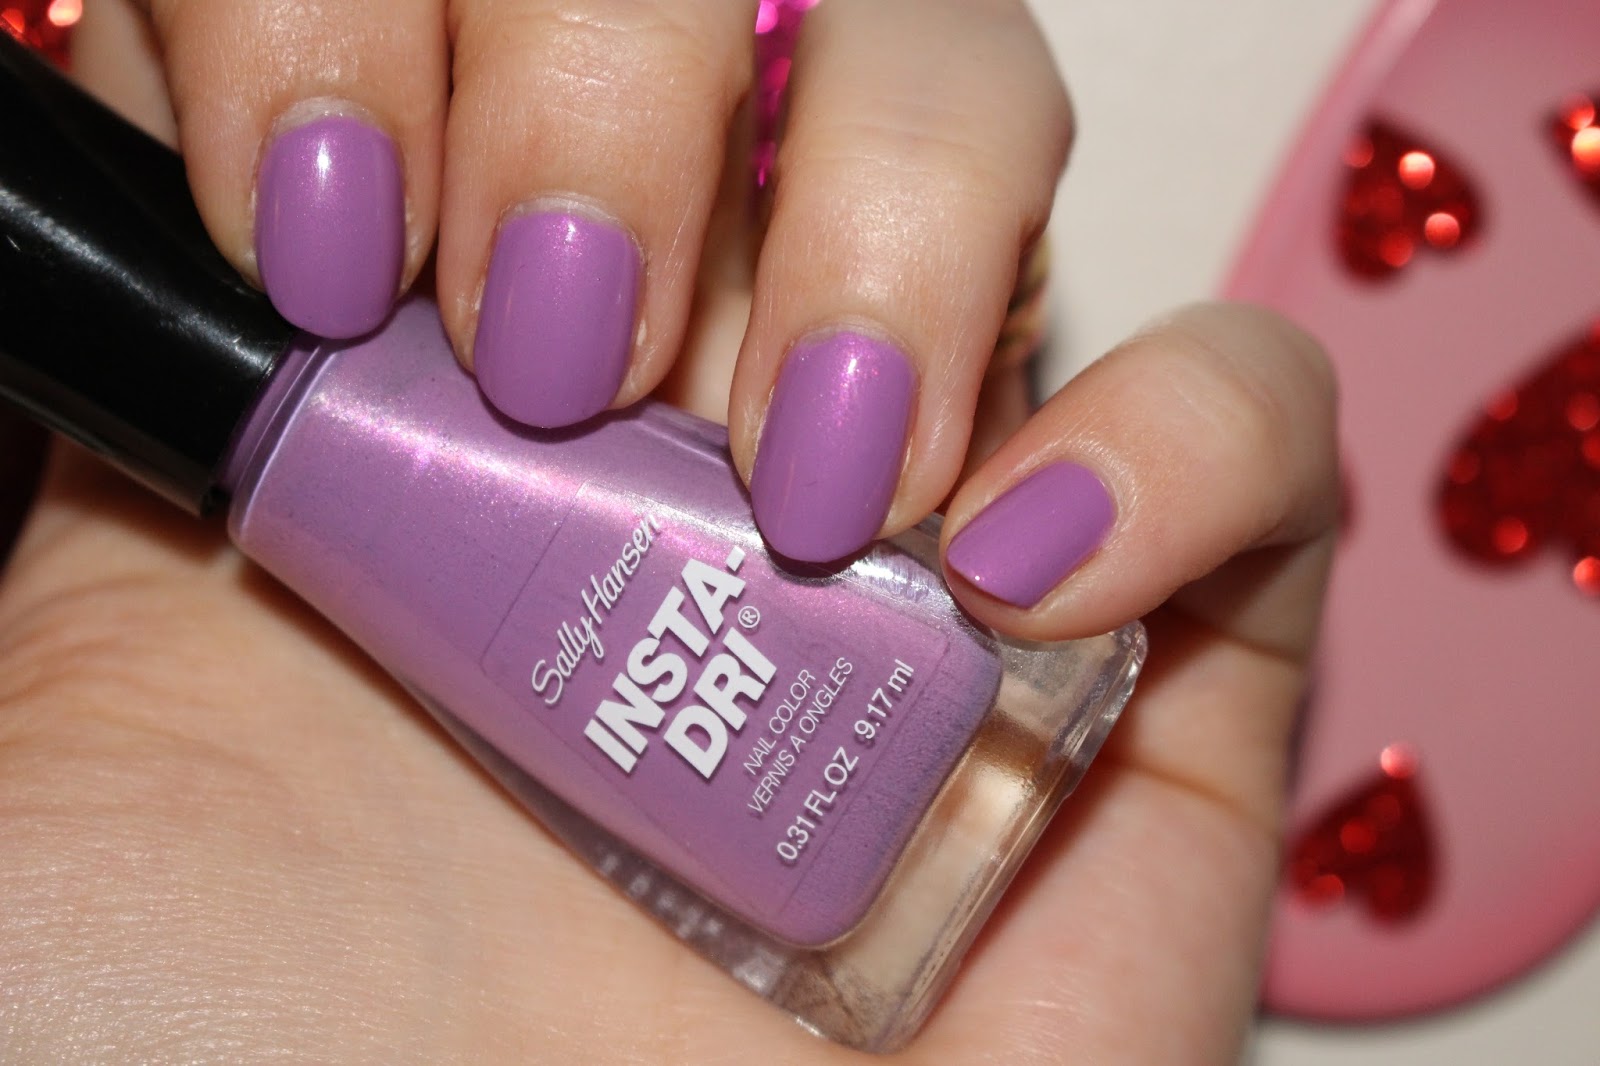 Sally Hansen Insta-Dri Nail Color in "Lively Lilac" - wide 1